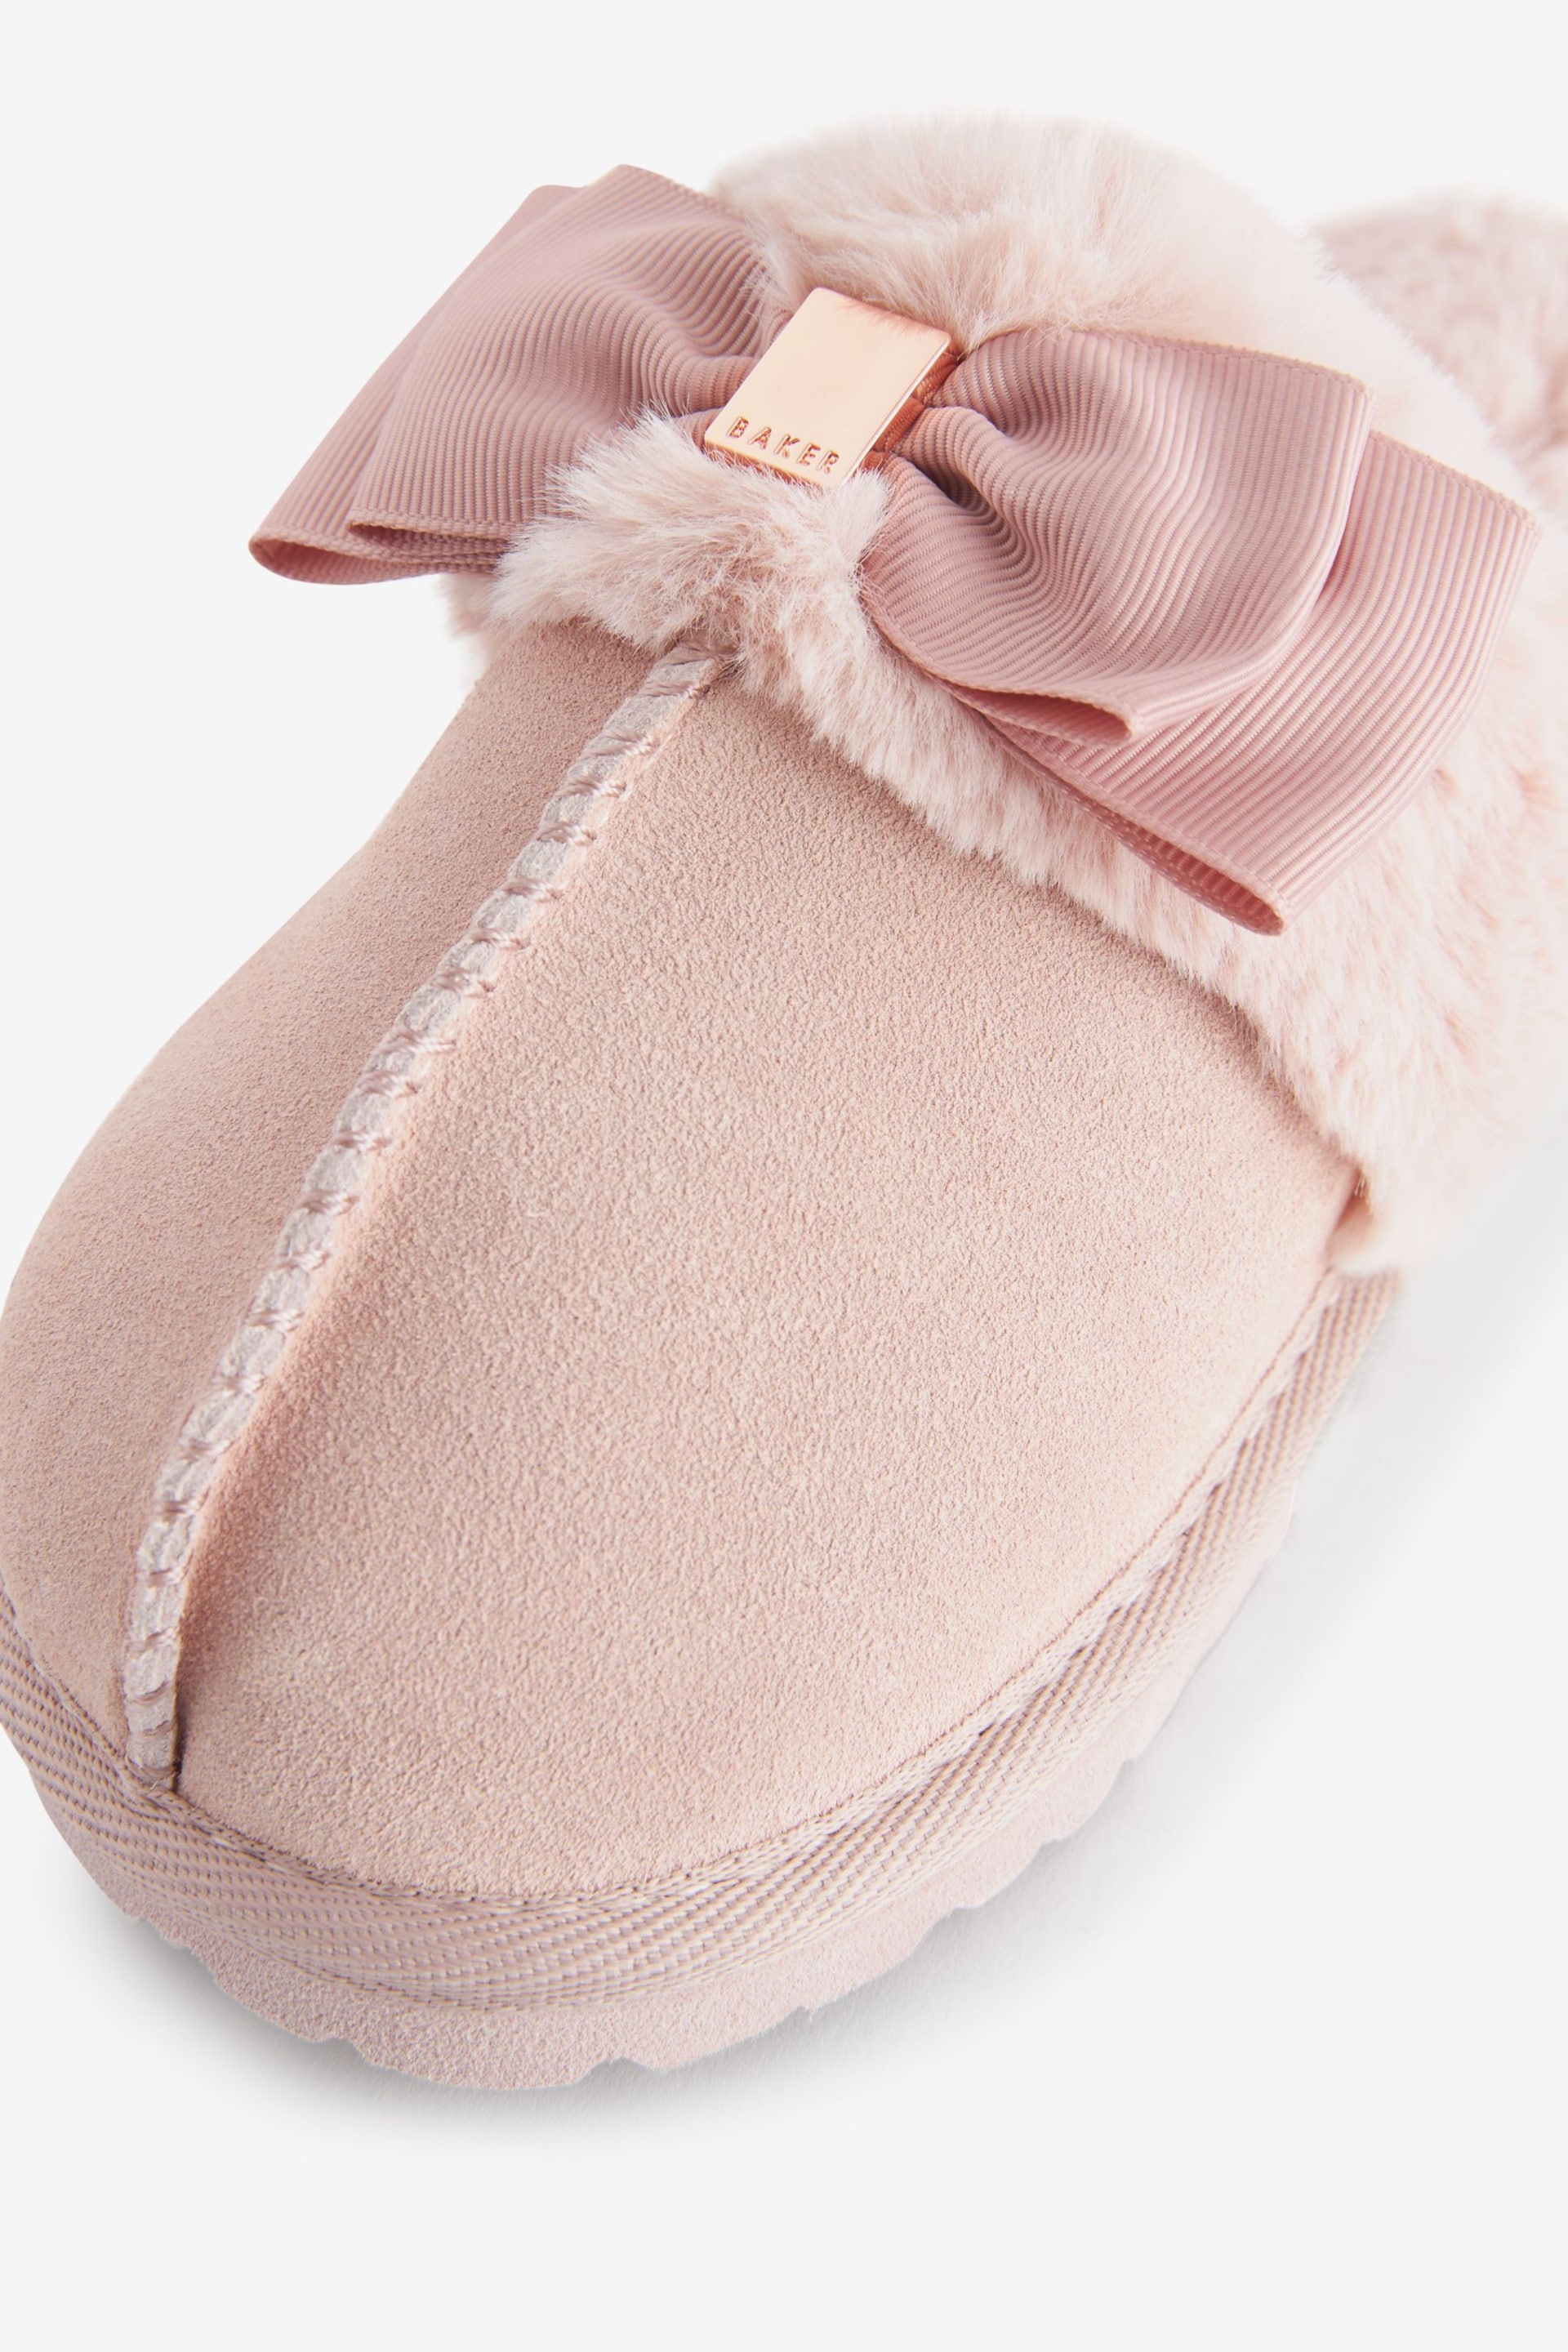 Baker by Ted Baker Girls Pink Faux Fur Trim Mule Slippers with Bow - Image 2 of 4